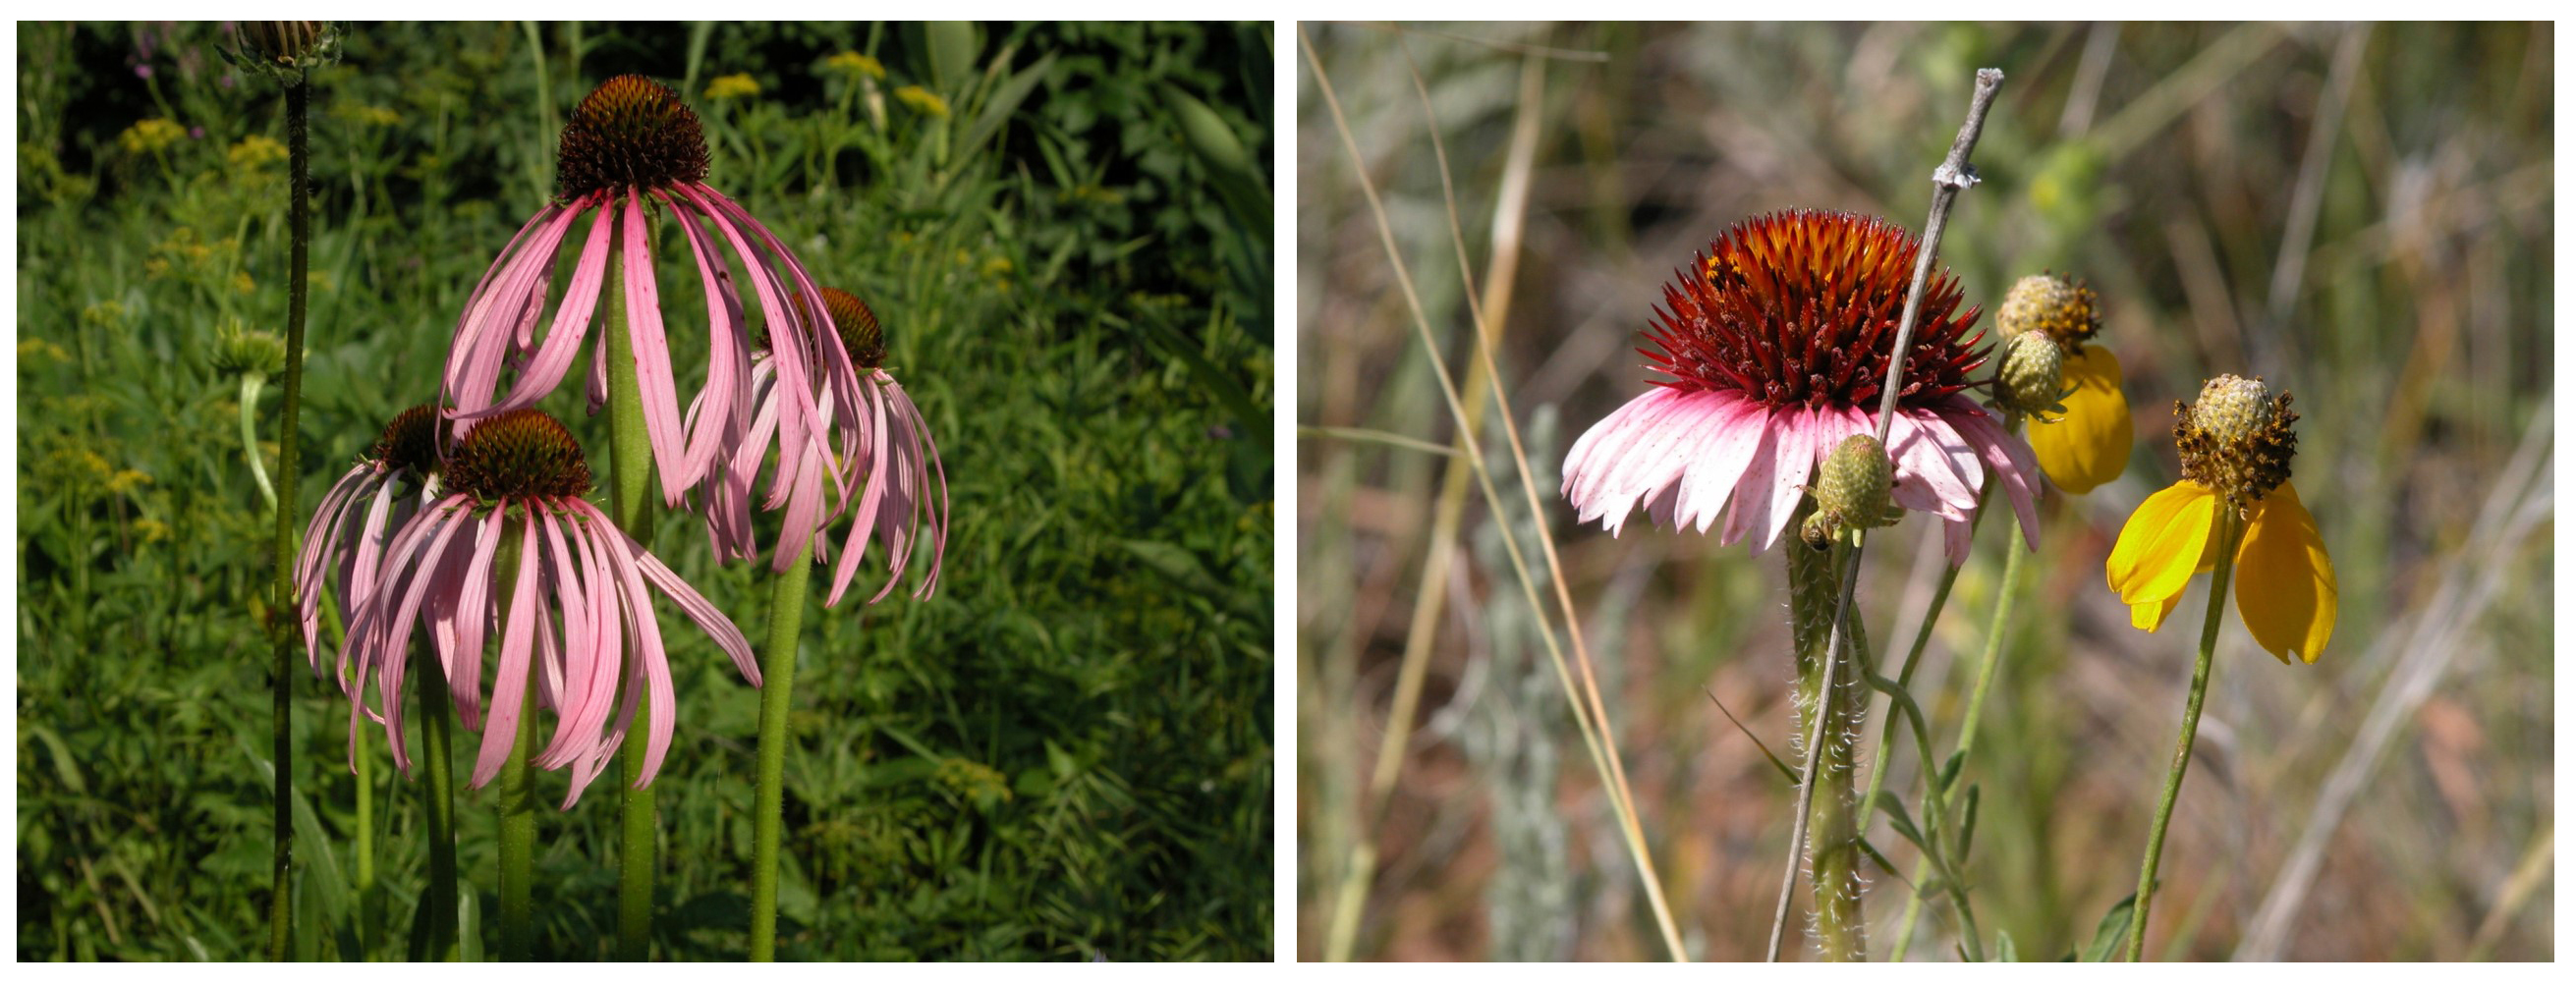 Echinacea pallida, with longer petals, and Echinacea angustifolia, with short petals are the two species that have been harvested significantly from wild populations.